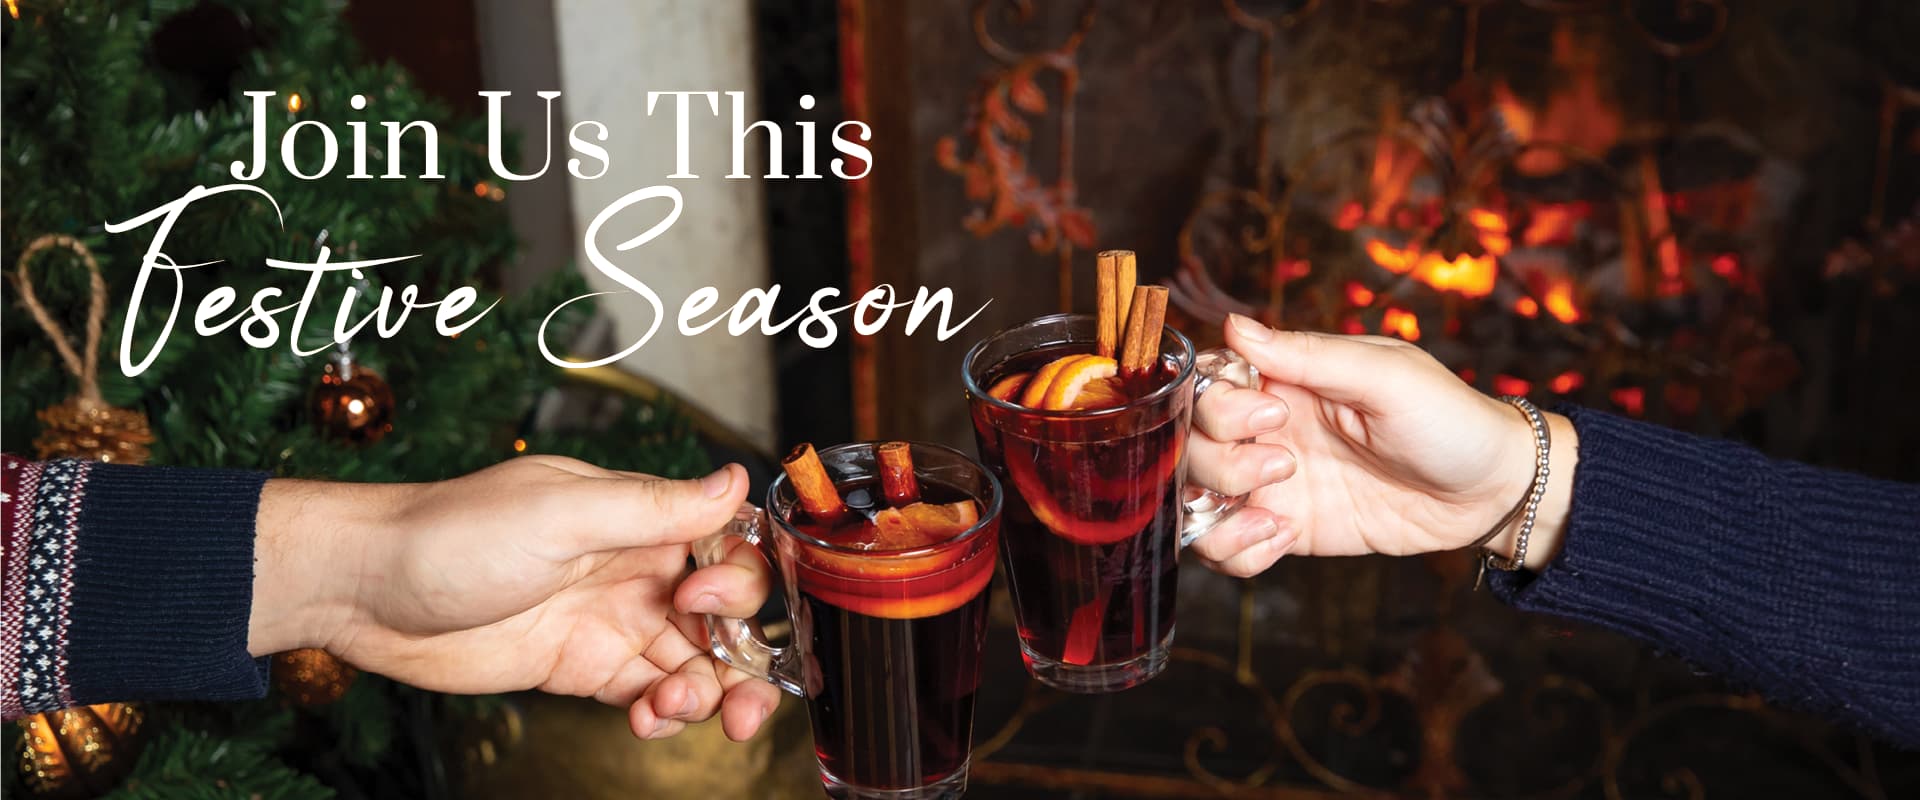 join us this festive season at The Farmers Boy  | Mulled Wine